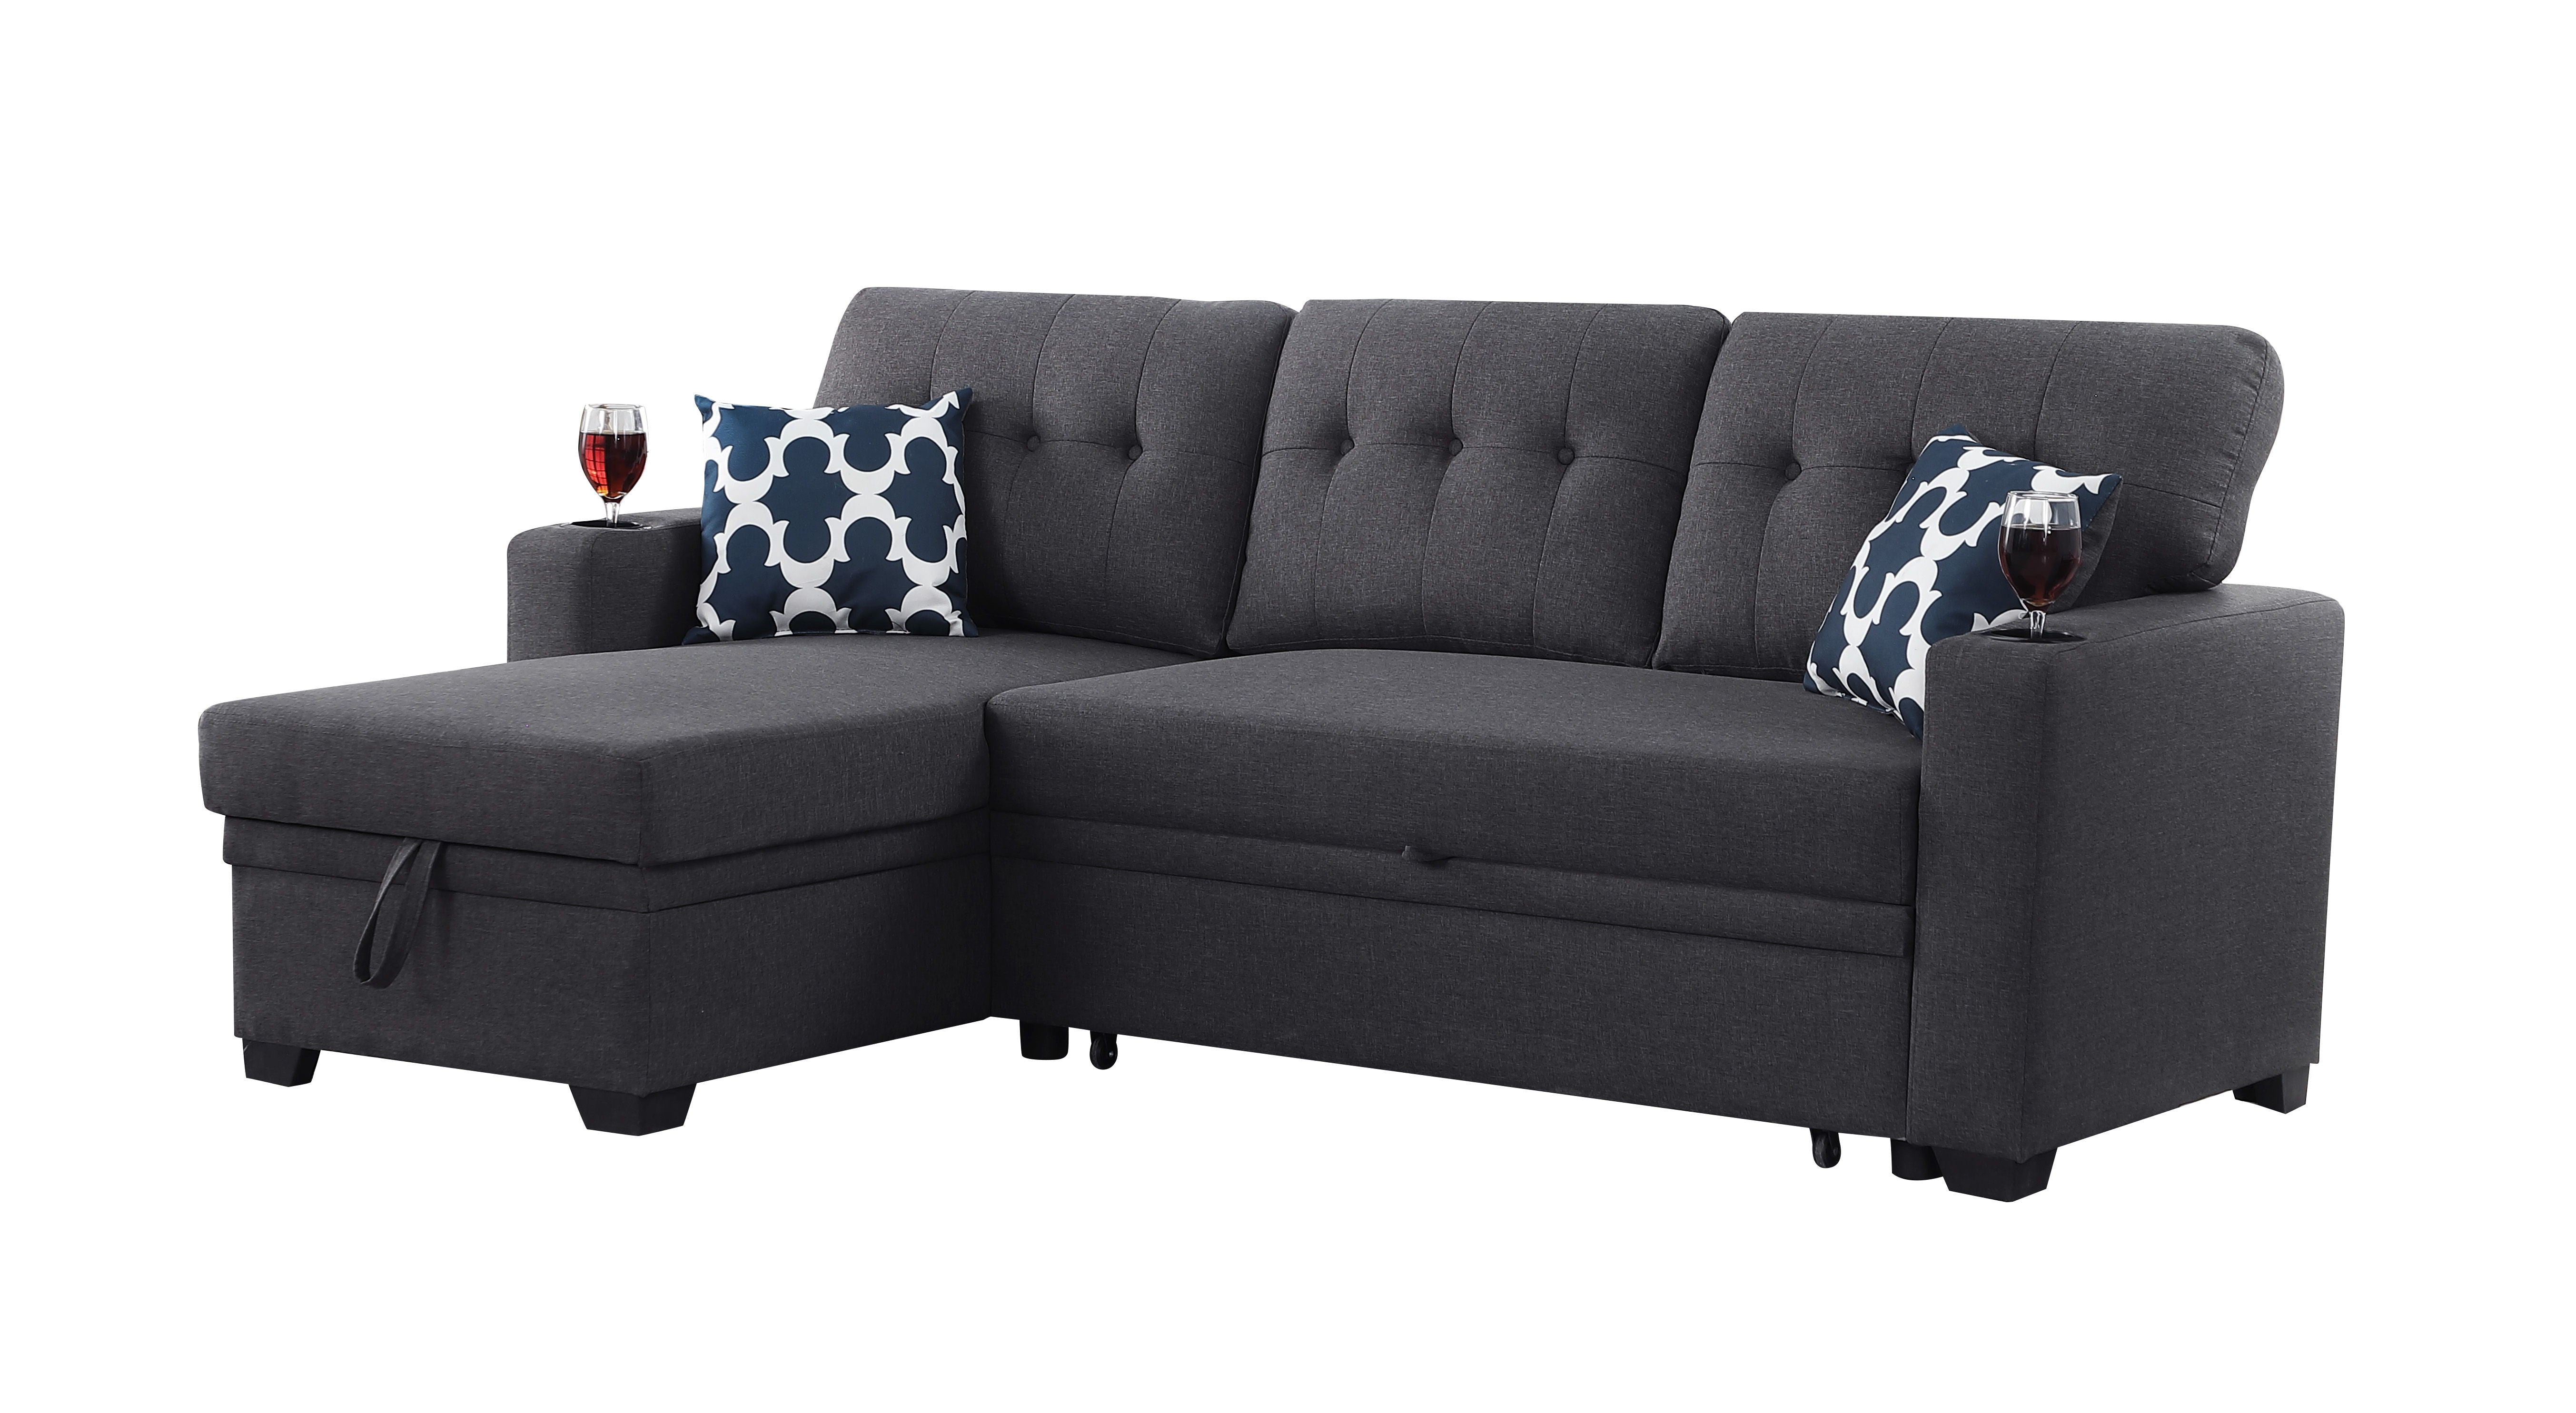 82" Width Sectional With Storage Chaise And Cupholder Armrest